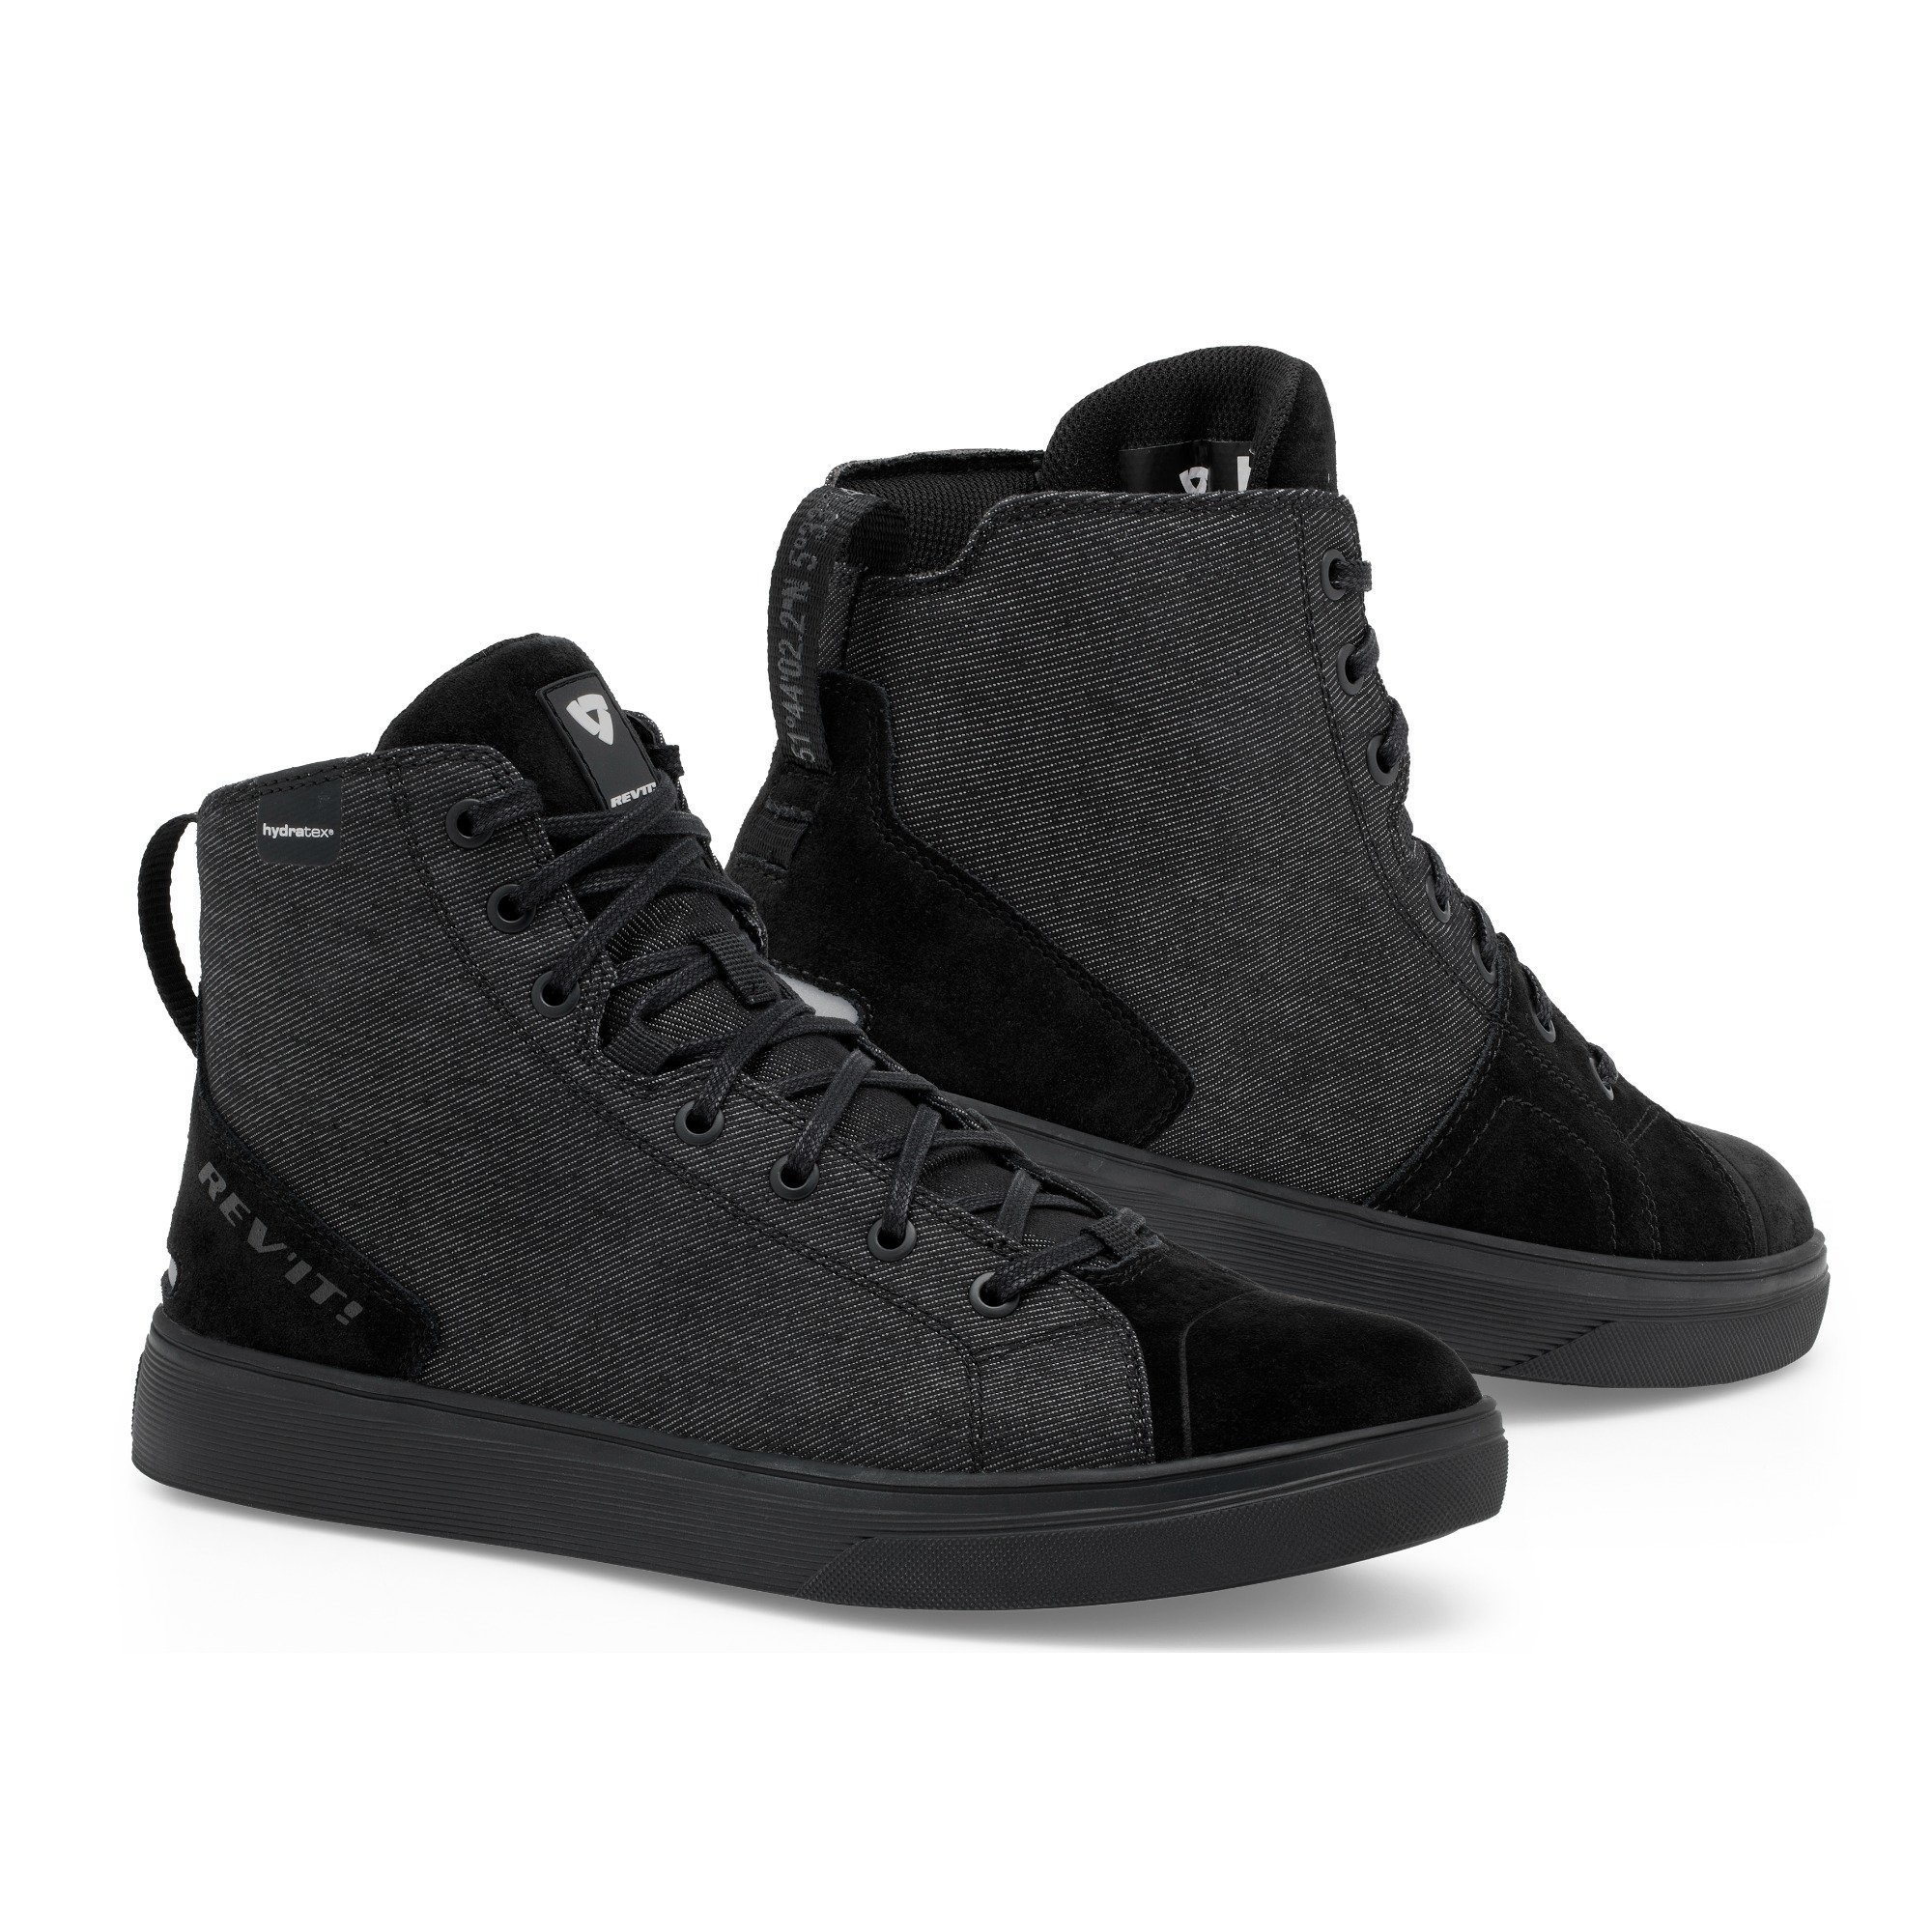 Image of REV'IT! Delta H2O Shoes Black Size 43 ID 8700001356374